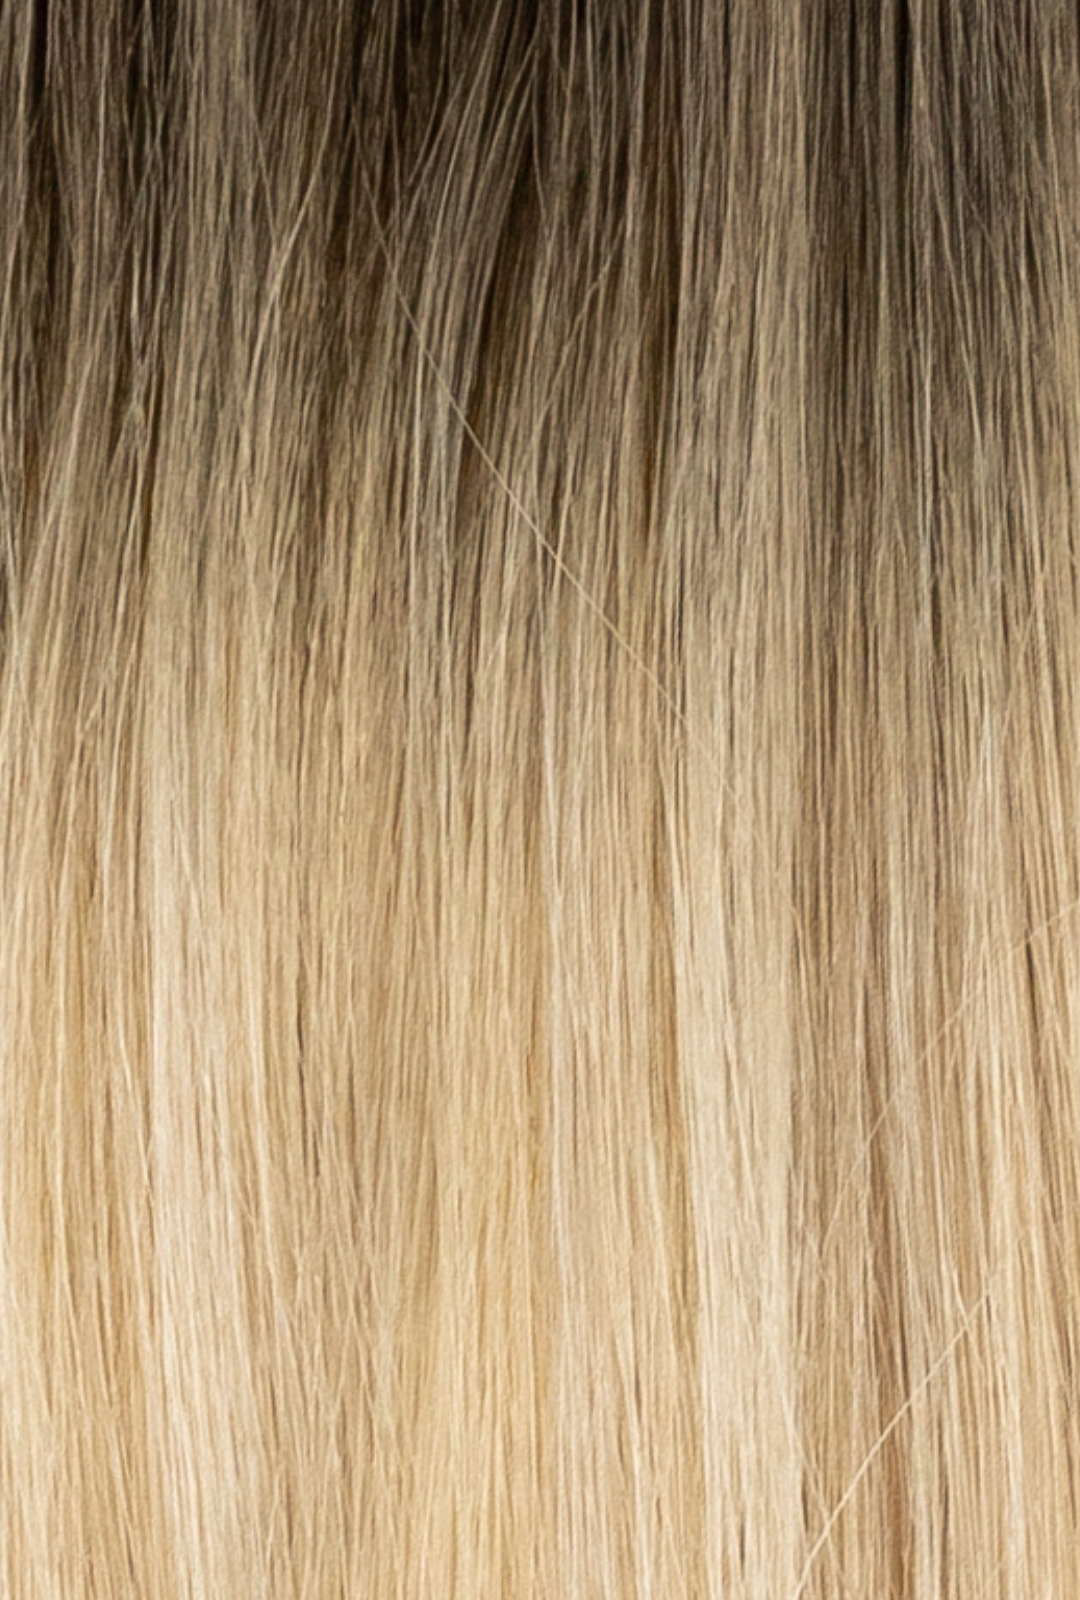 Beachwashed X Laced Hair Hand Tied Weft - Surf